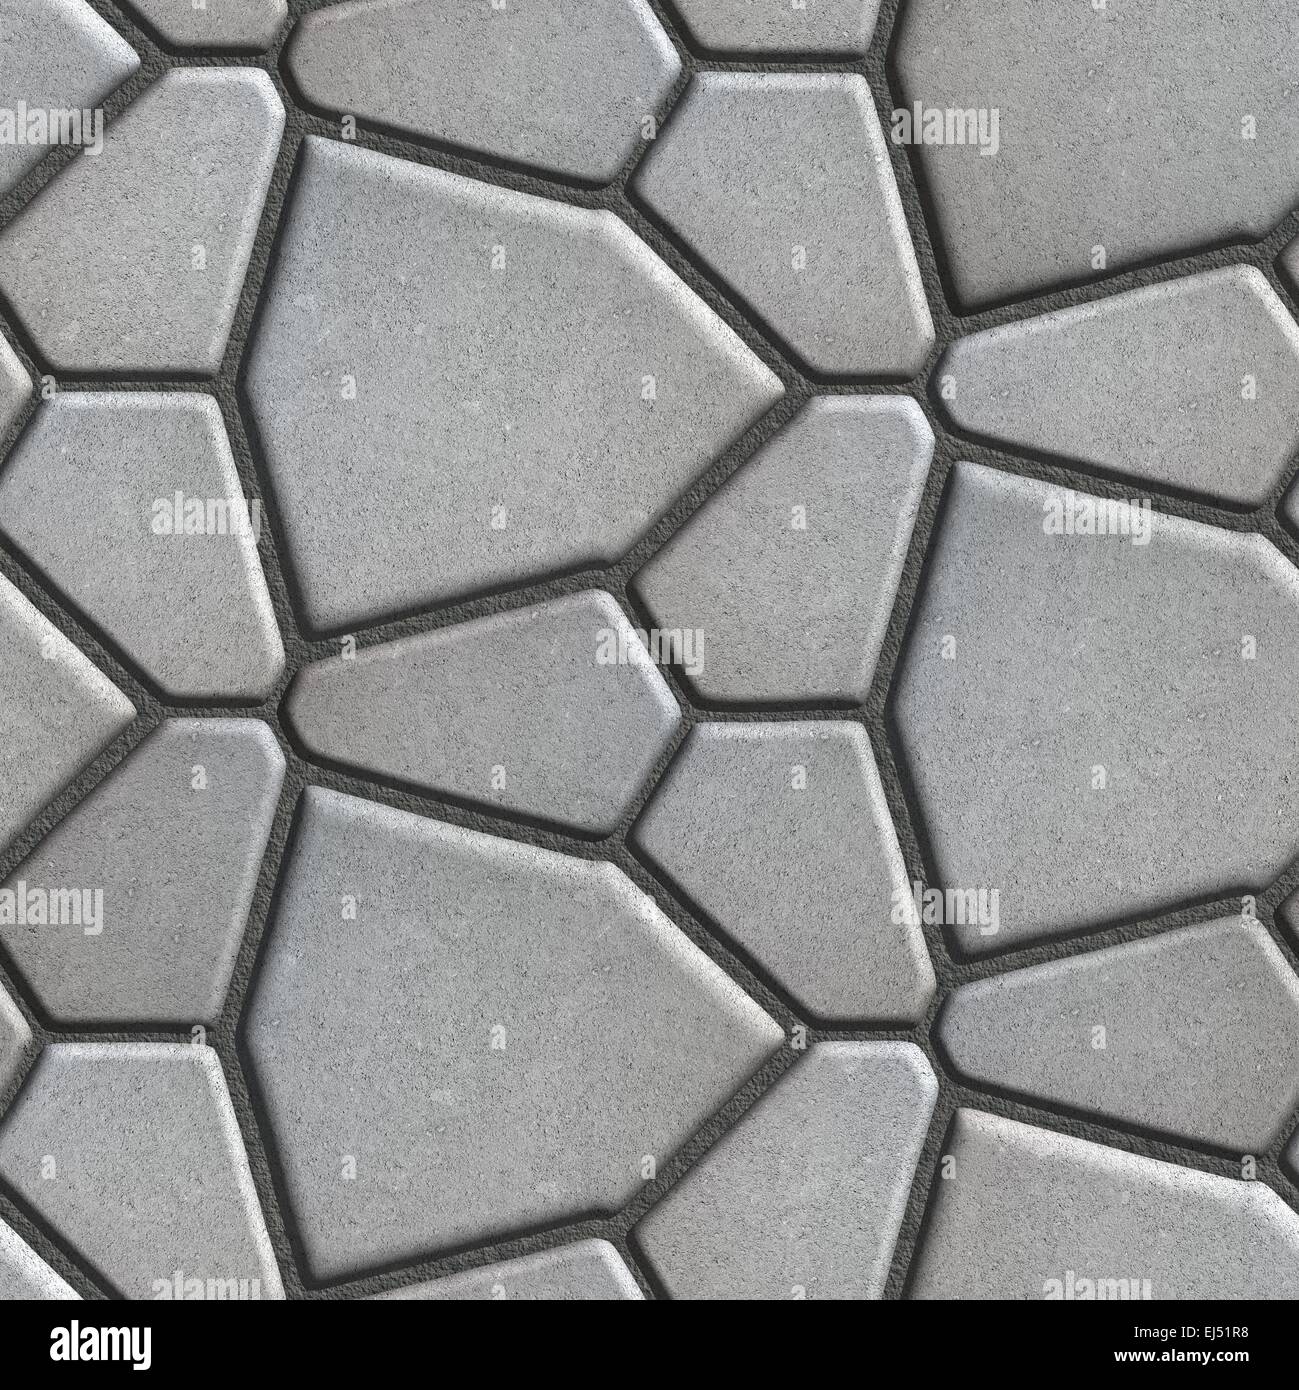 Gray Pavement - Different Size of Polygons. Stock Photo